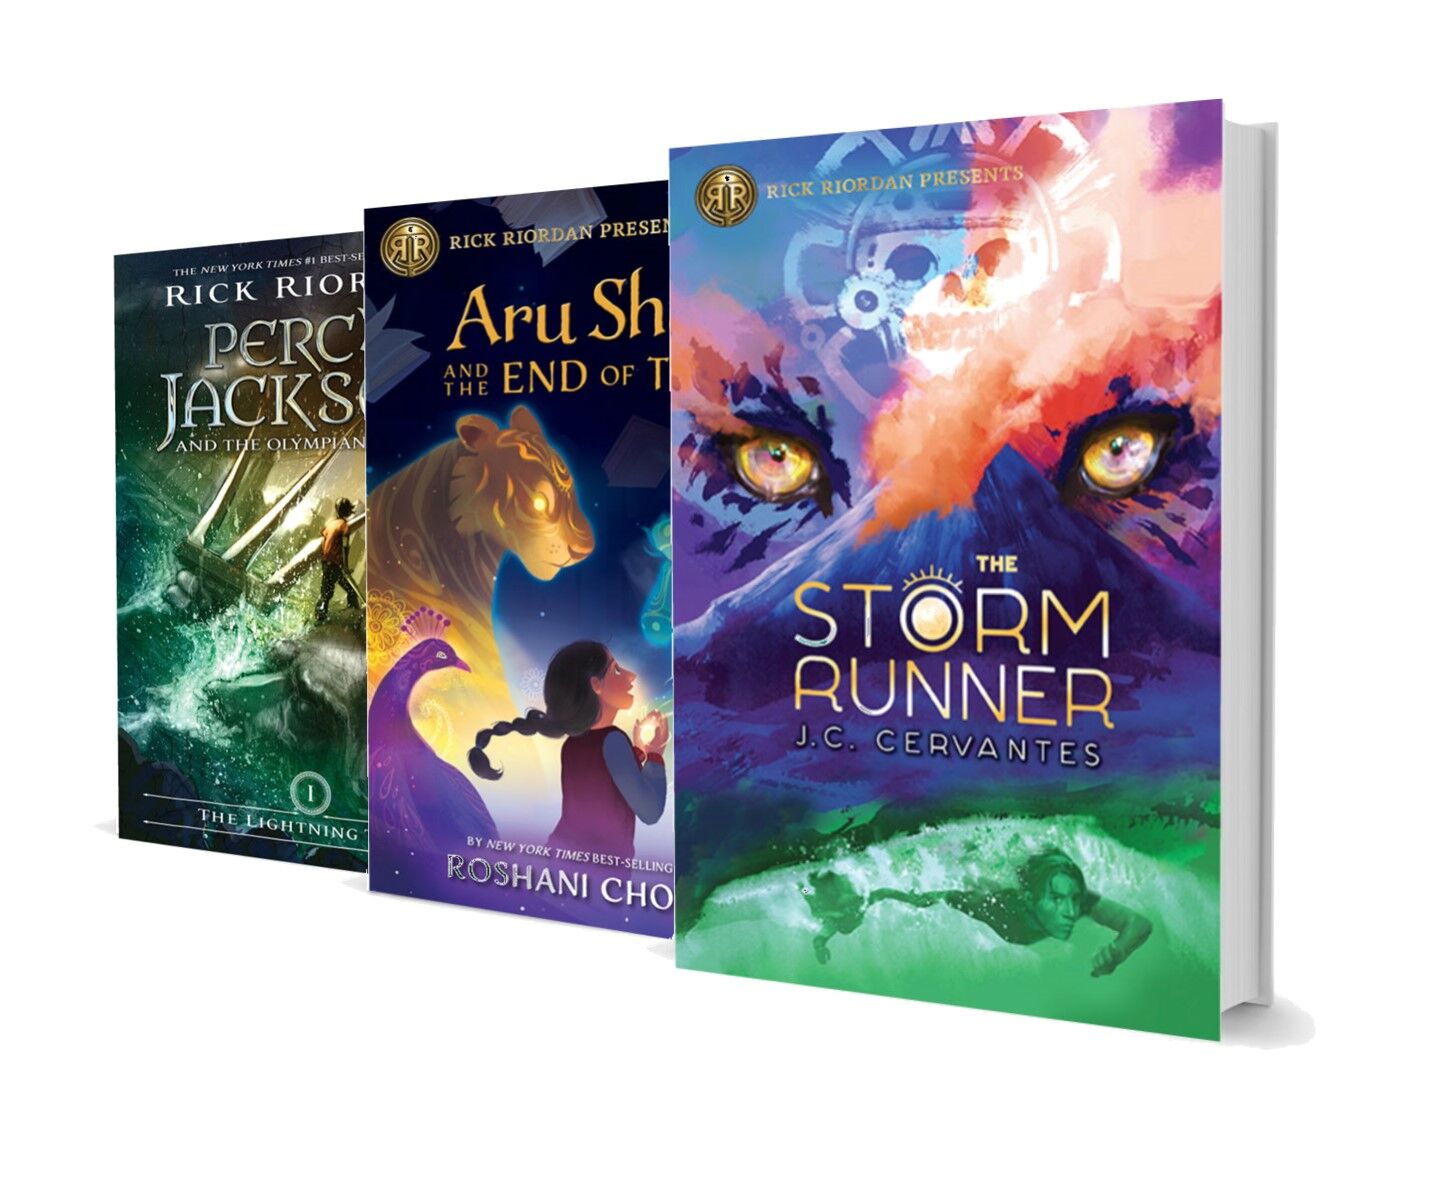 The Shadow Crosser A Storm Runner Novel, Book 3 by J. C. Cervantes - The  Storm Runner Series - Disney-Hyperion, Other Books